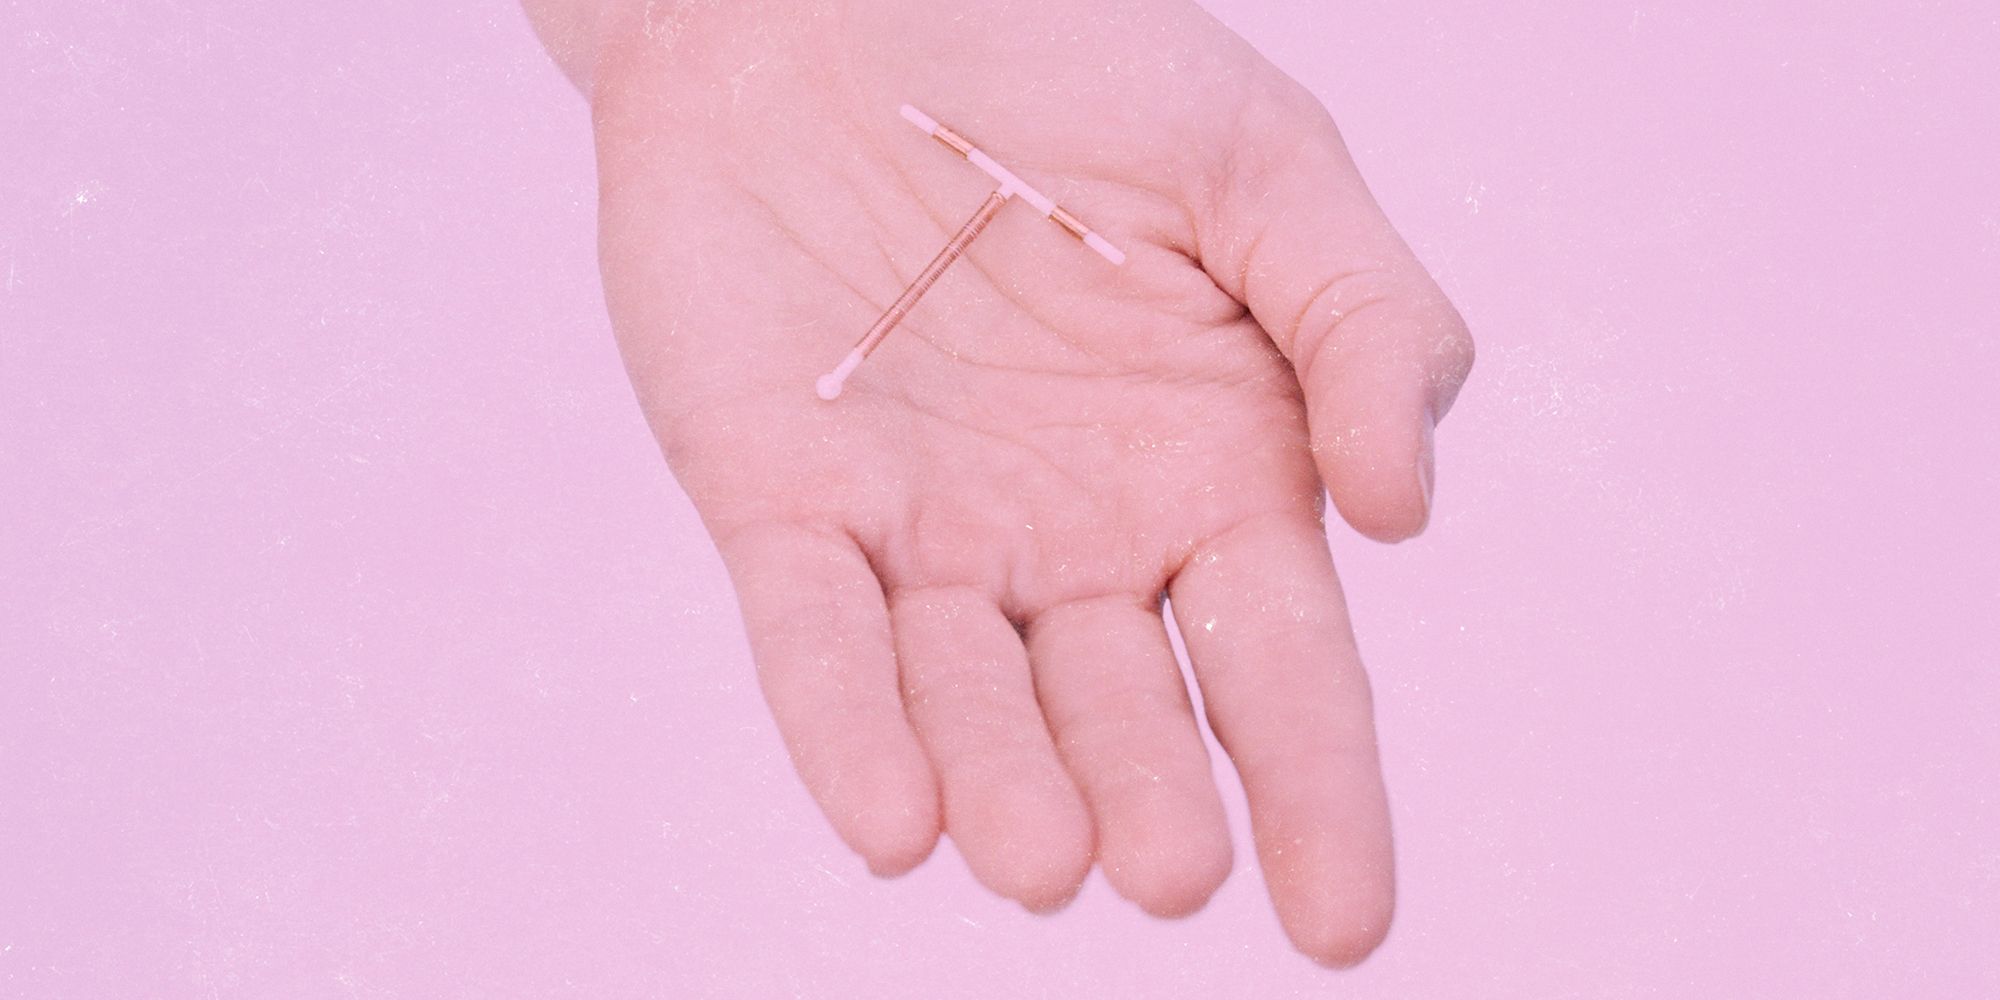 What Iud Insertion Feels Like Does Getting An Iud Hurt.